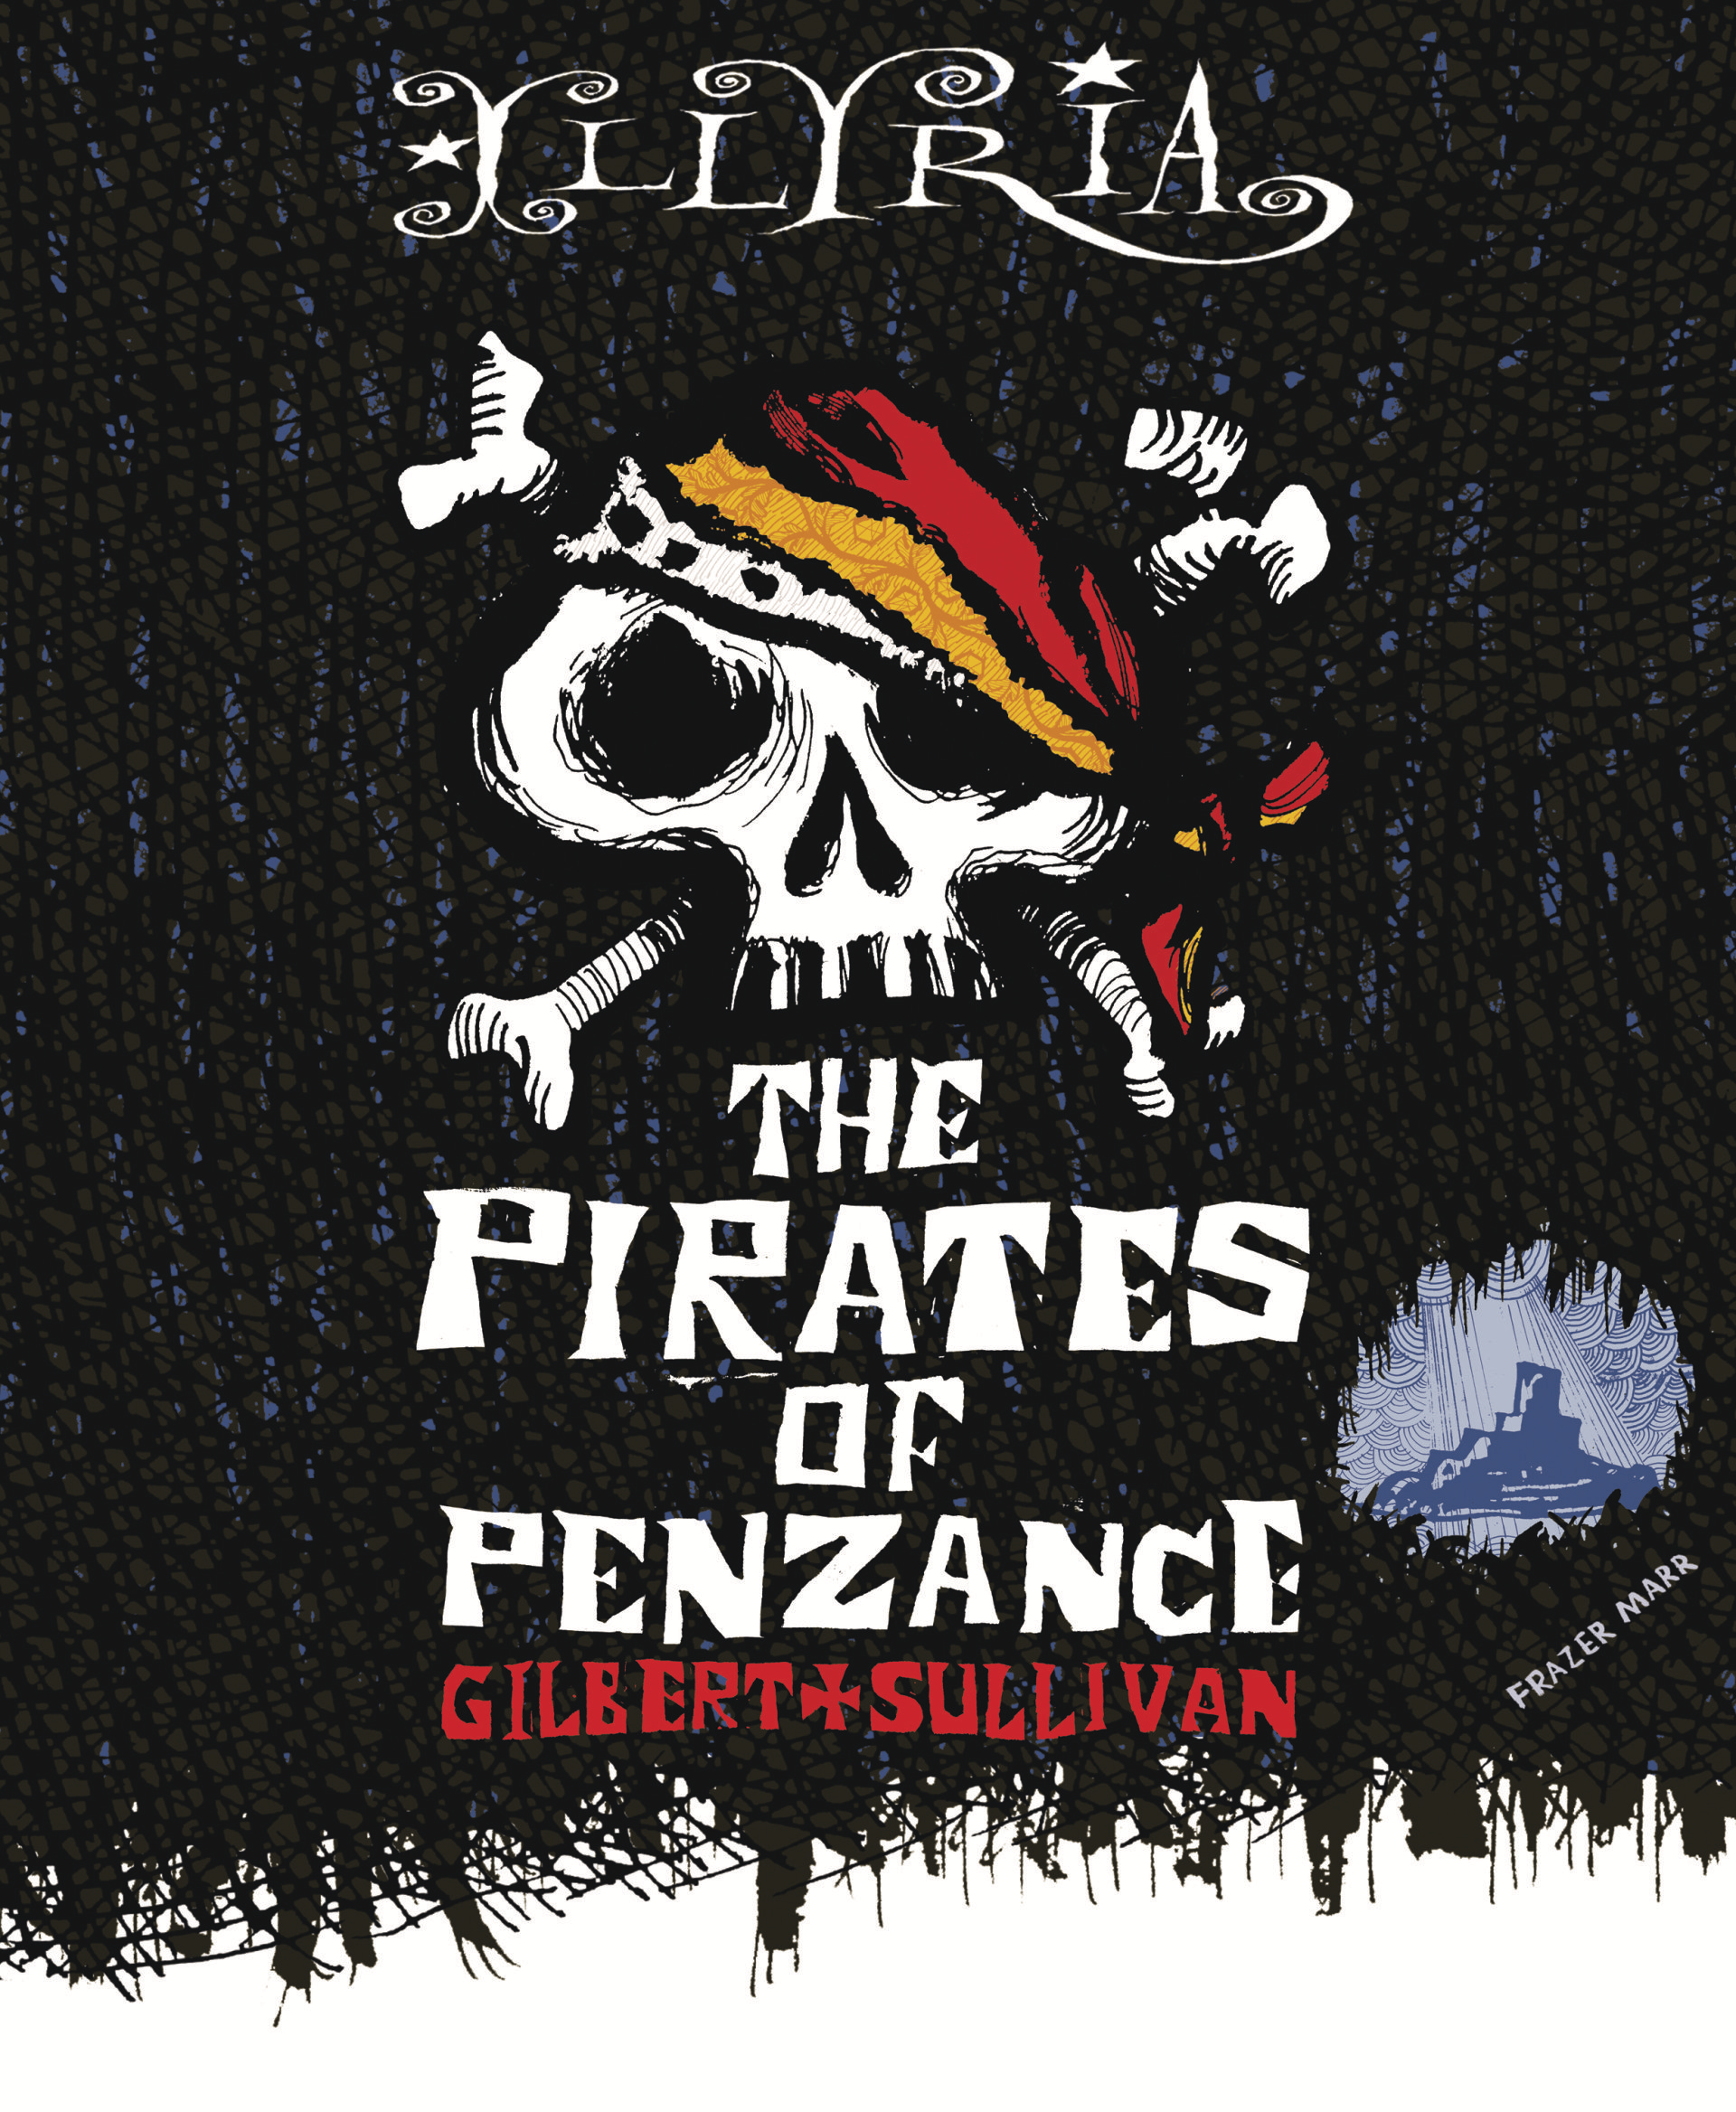 A book called the pirates of penzance by gilbert sullivan